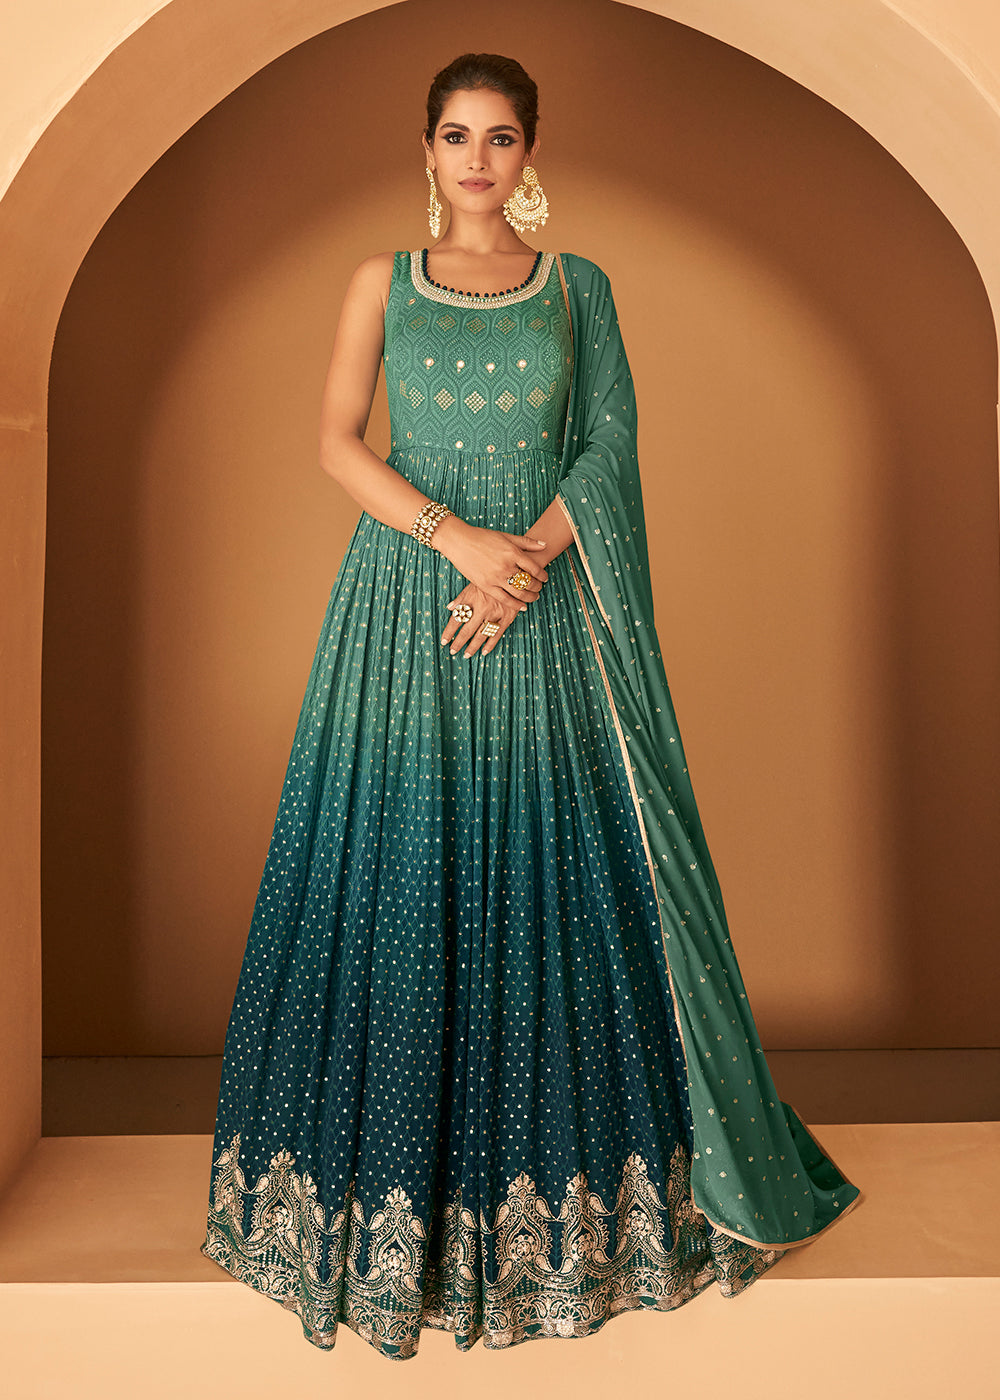 Buy Now Georgette Rama Green Embroidered Designer Wedding Gown Online in USA, UK, Australia, Canada & Worldwide at Empress Clothing. 